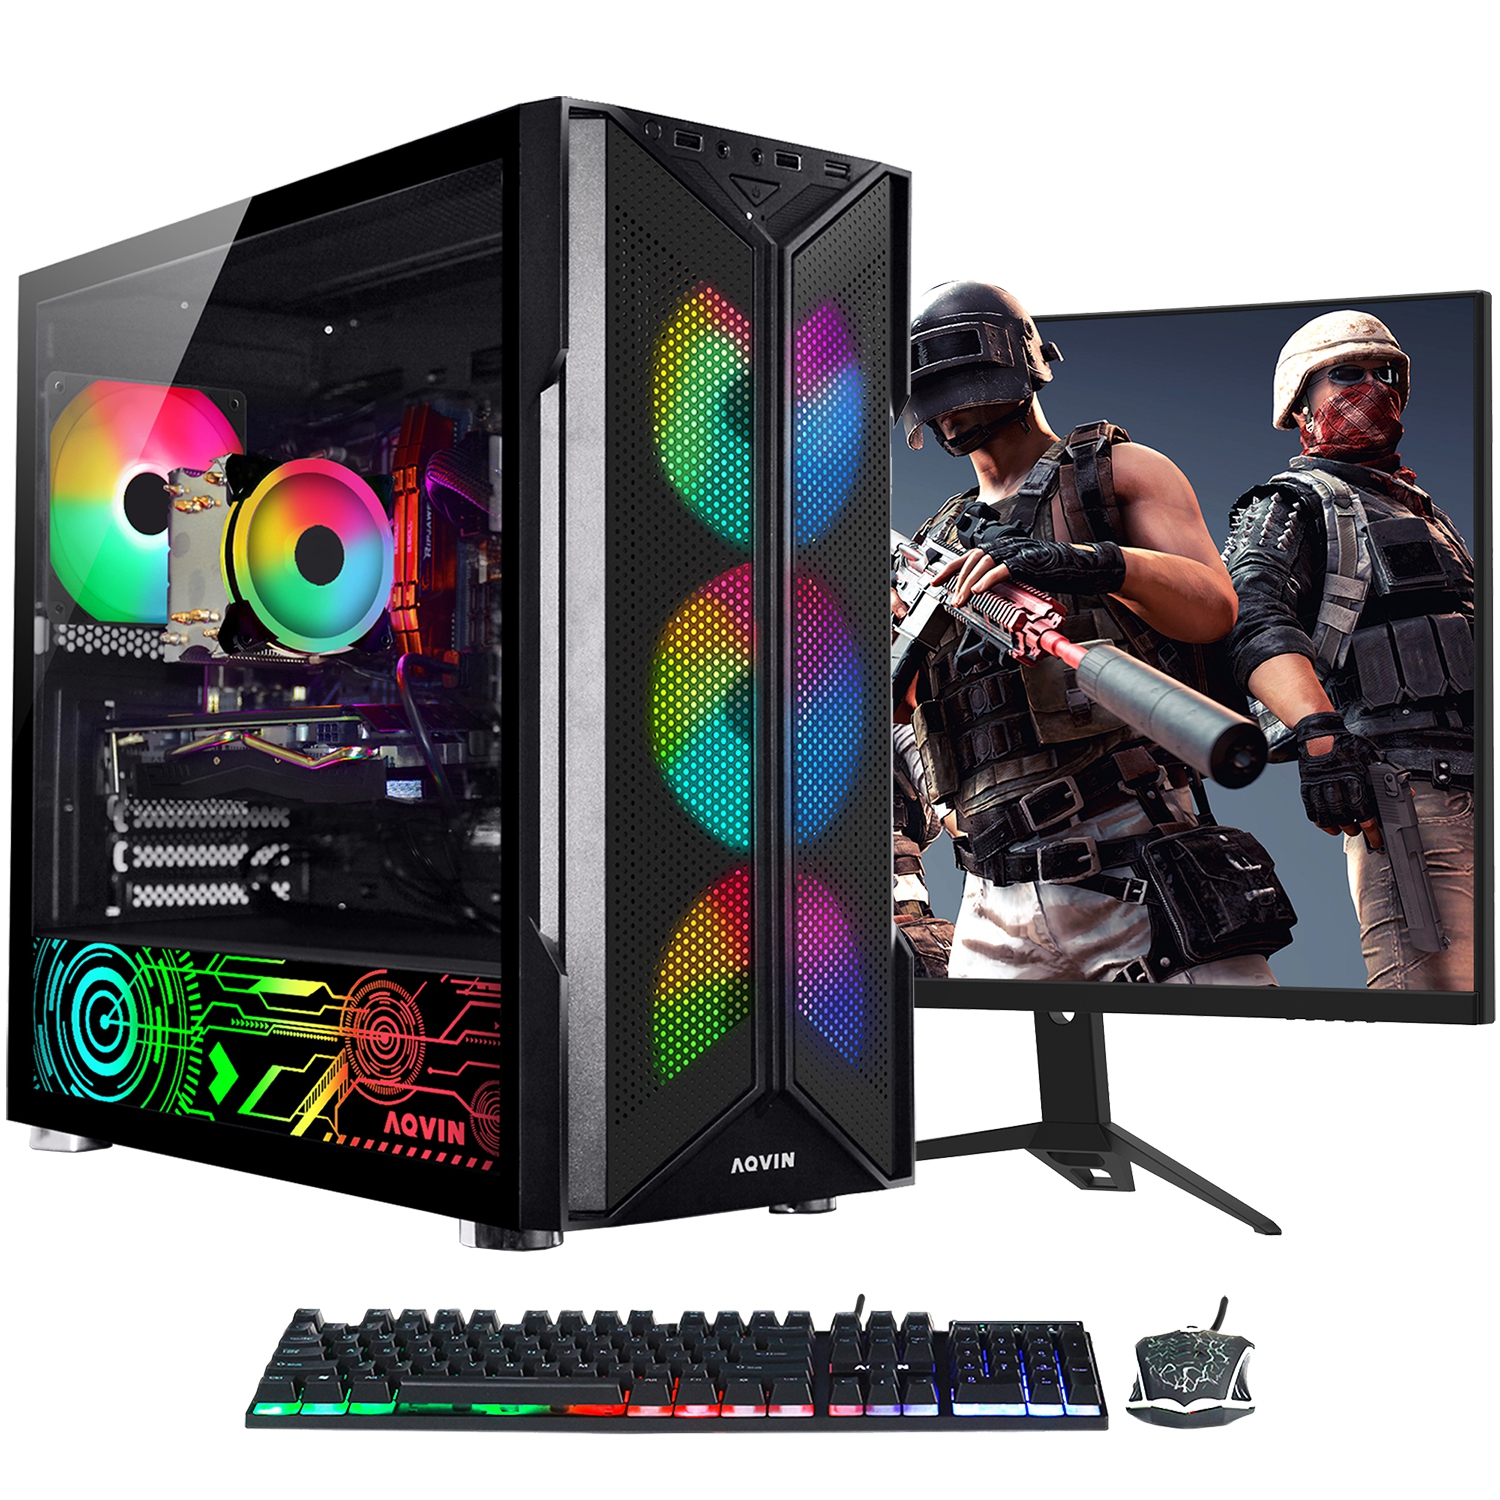 AQVIN-AQ20 Desktop Computer Tower Gaming PC - New 24 inch Curved Gaming Monitor (Intel Core i7 processor/ 32GB RAM/ 1TB SSD/ AMD RX 580 8GB/ Windows 11) - Only at Best Buy